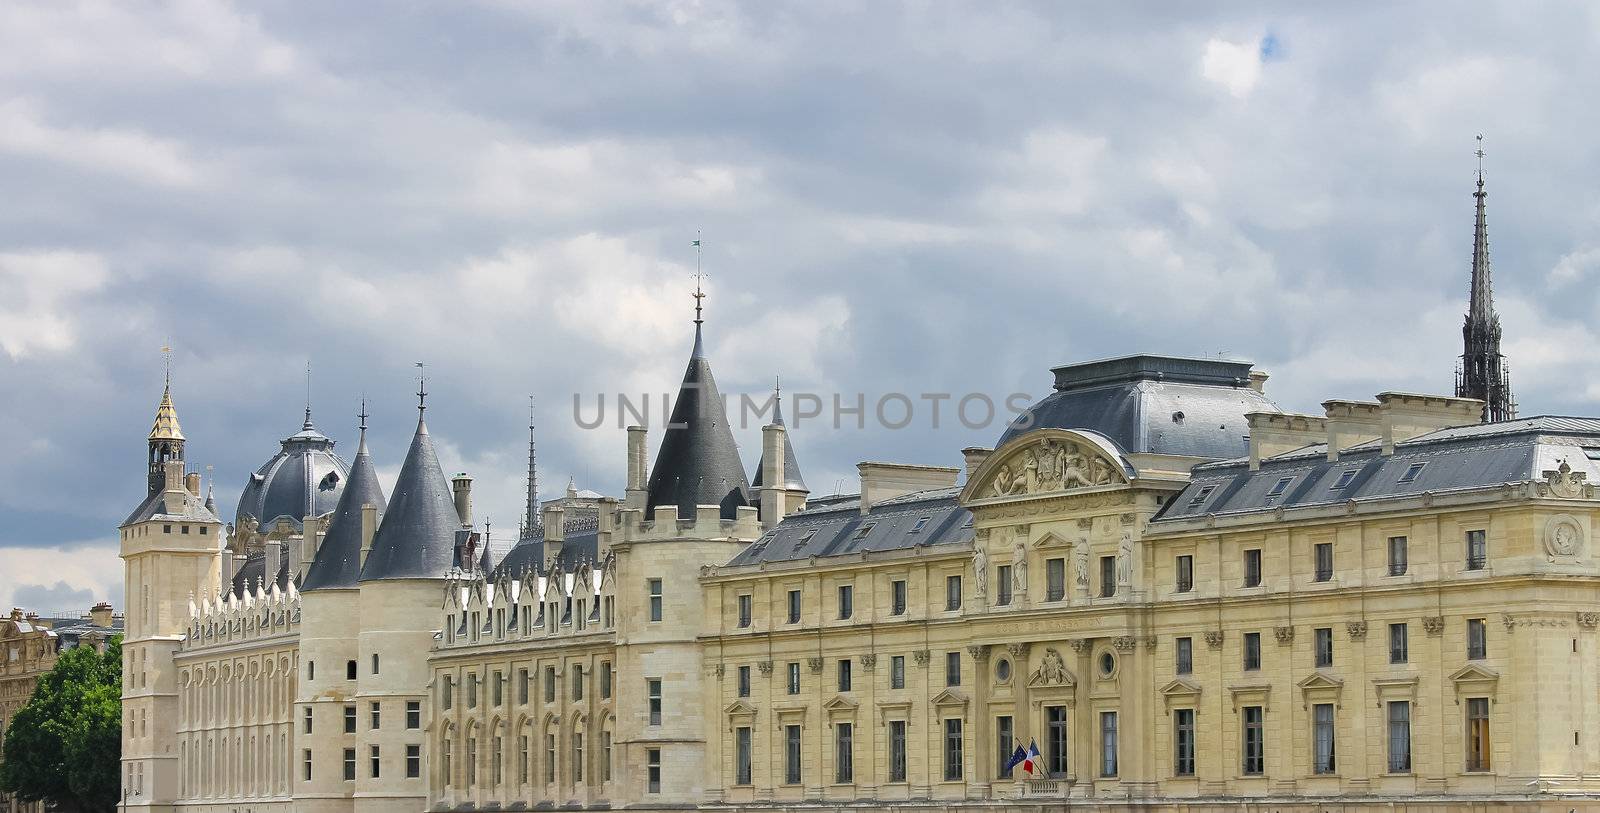 Castle Conciergerie, the former royal palace and prison in Paris by NickNick